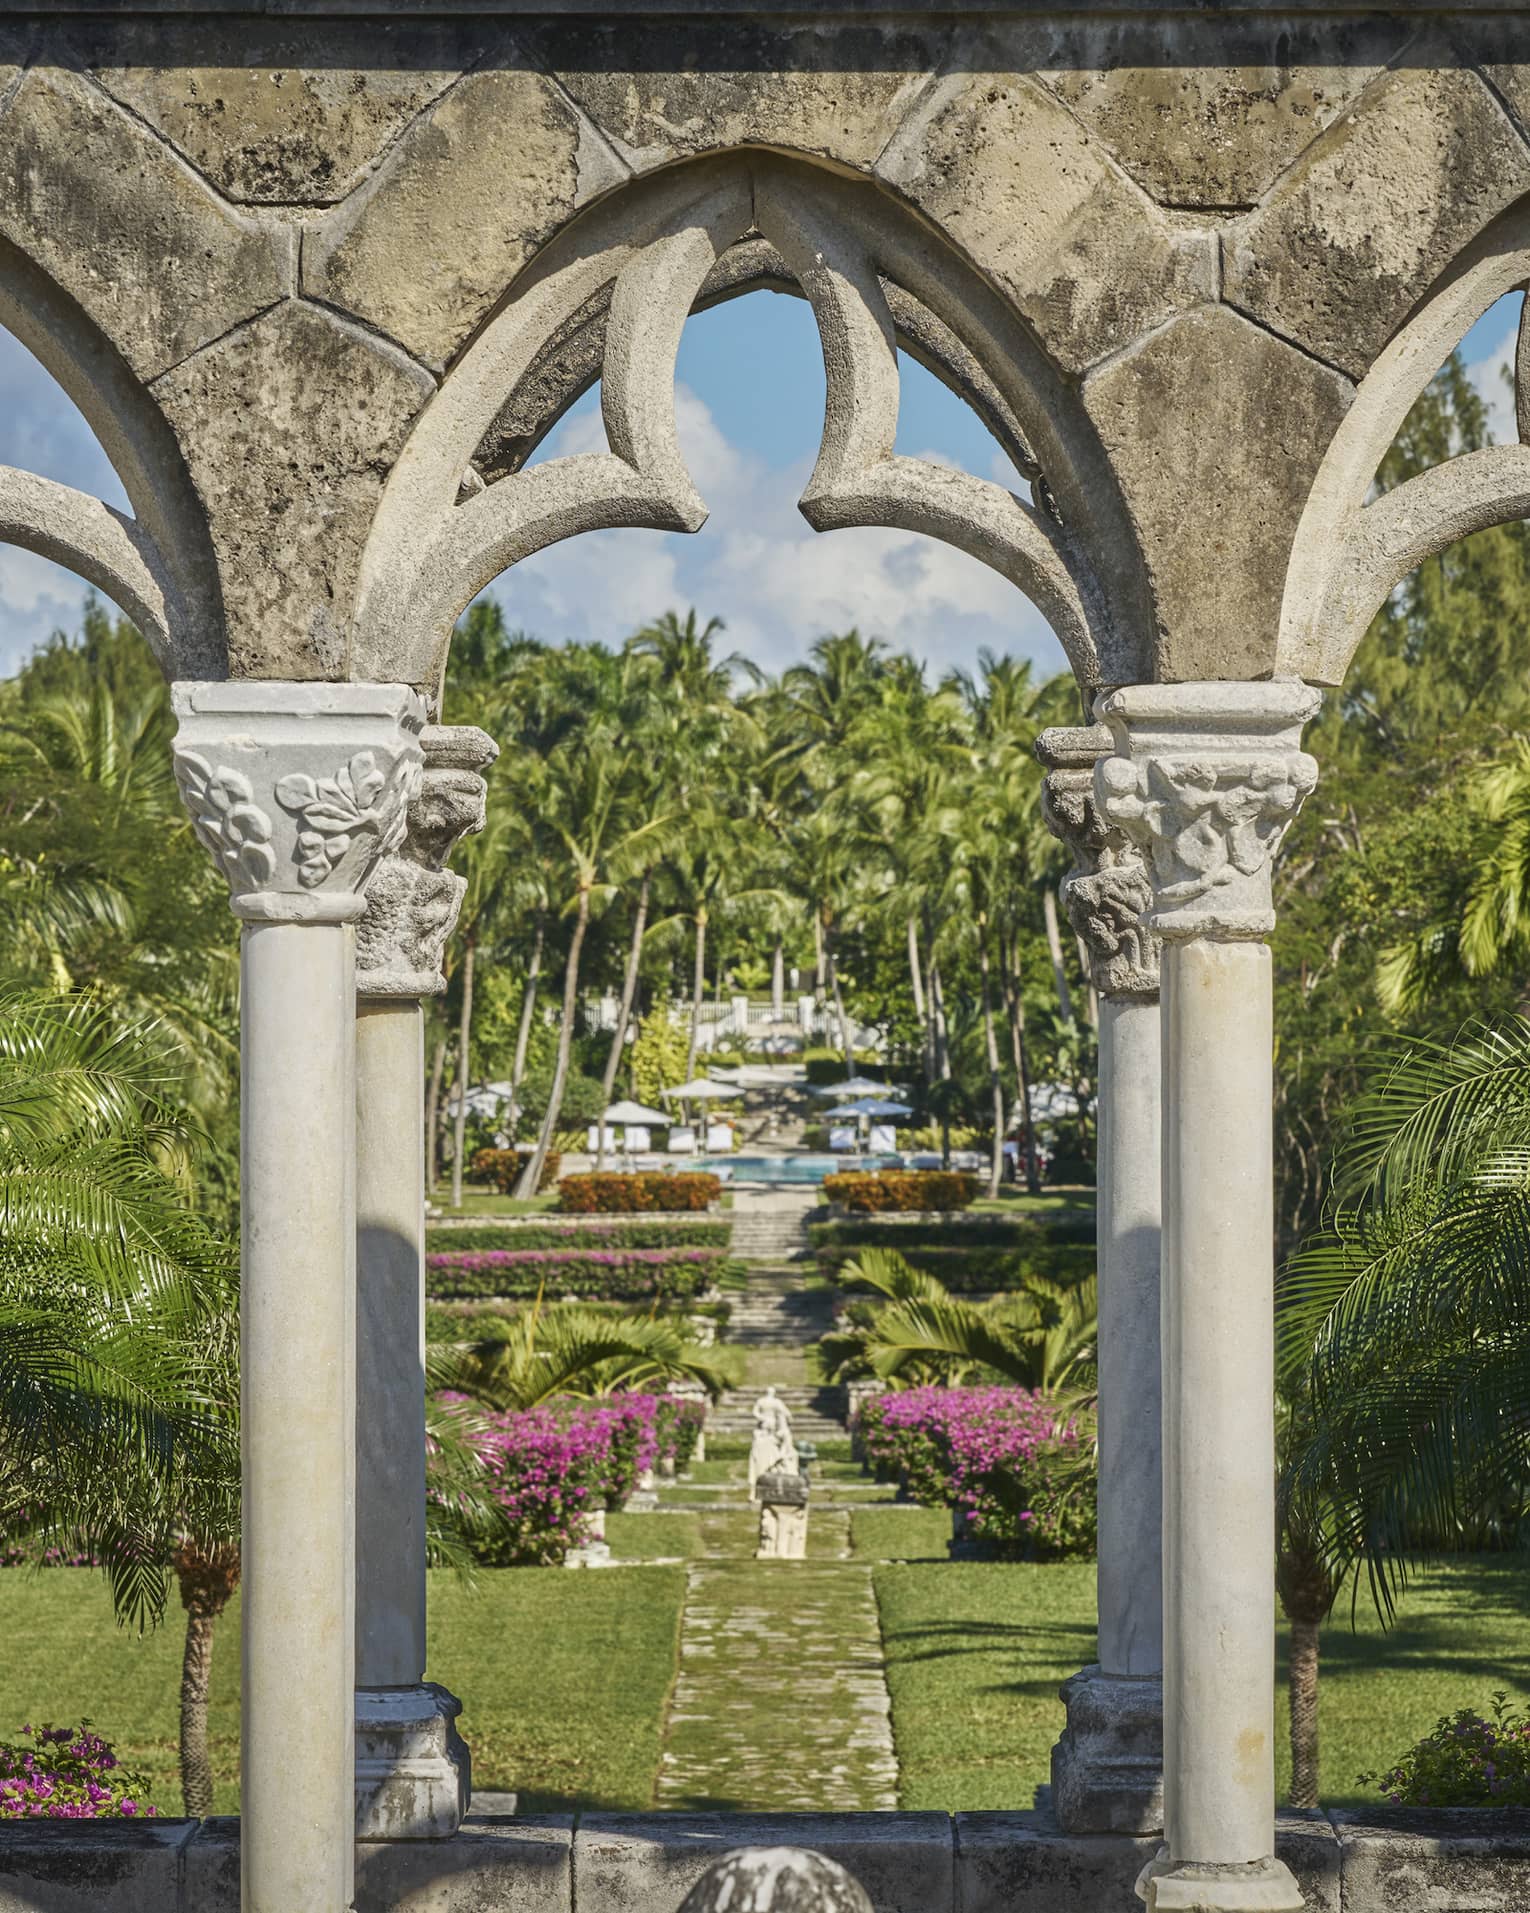 Stone arches leading to a green garden with grass, flowers and palm trees.